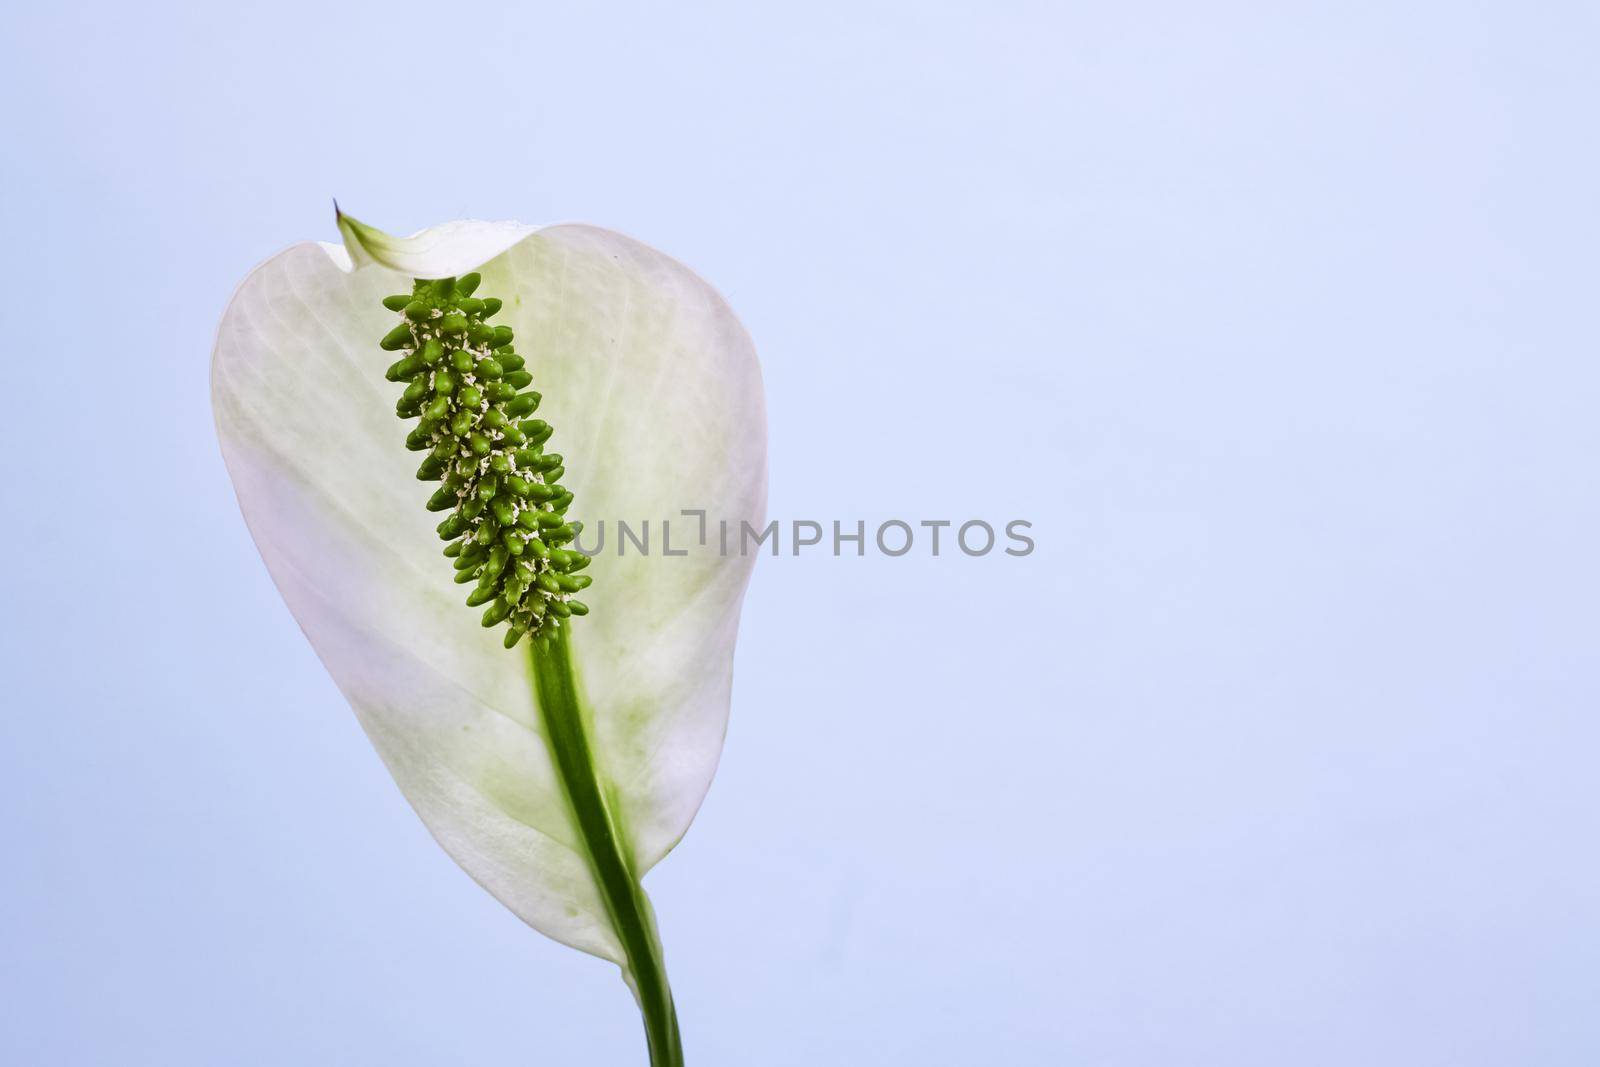 White spathiphyllum flower on a blue background, copy space